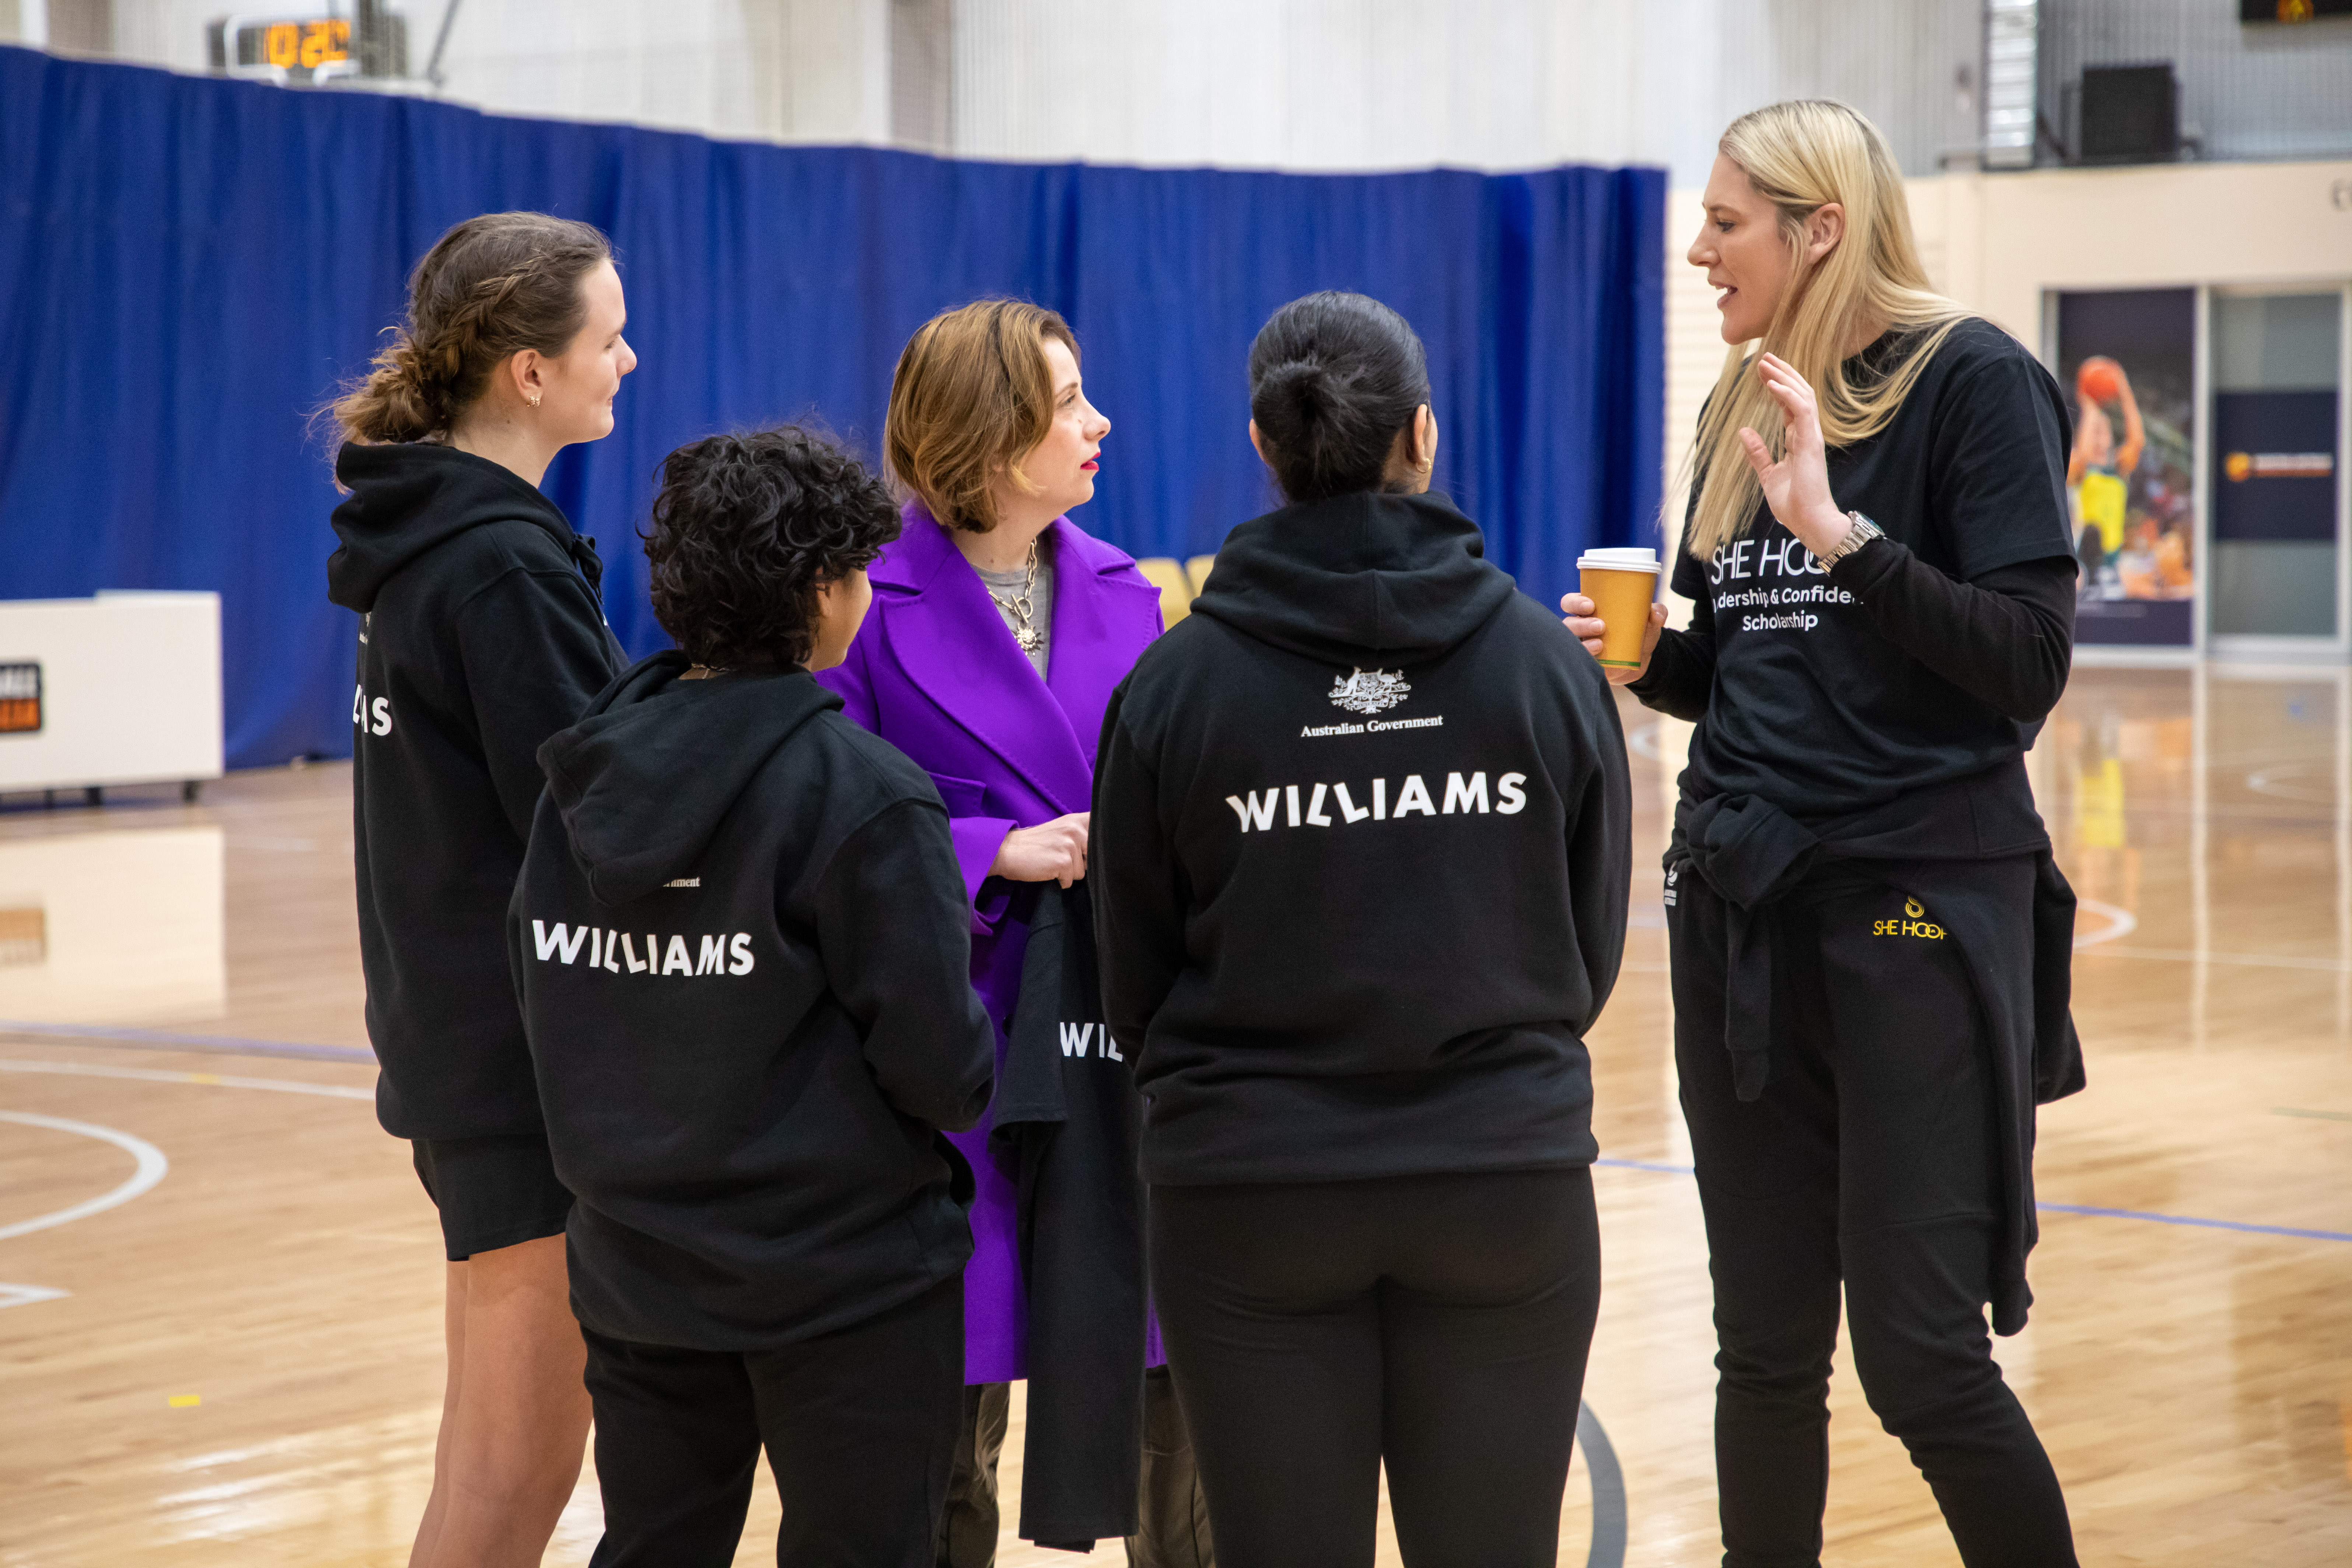 Minister for Sport Anika Wells and Lauren Jackson meet with young basketball players.